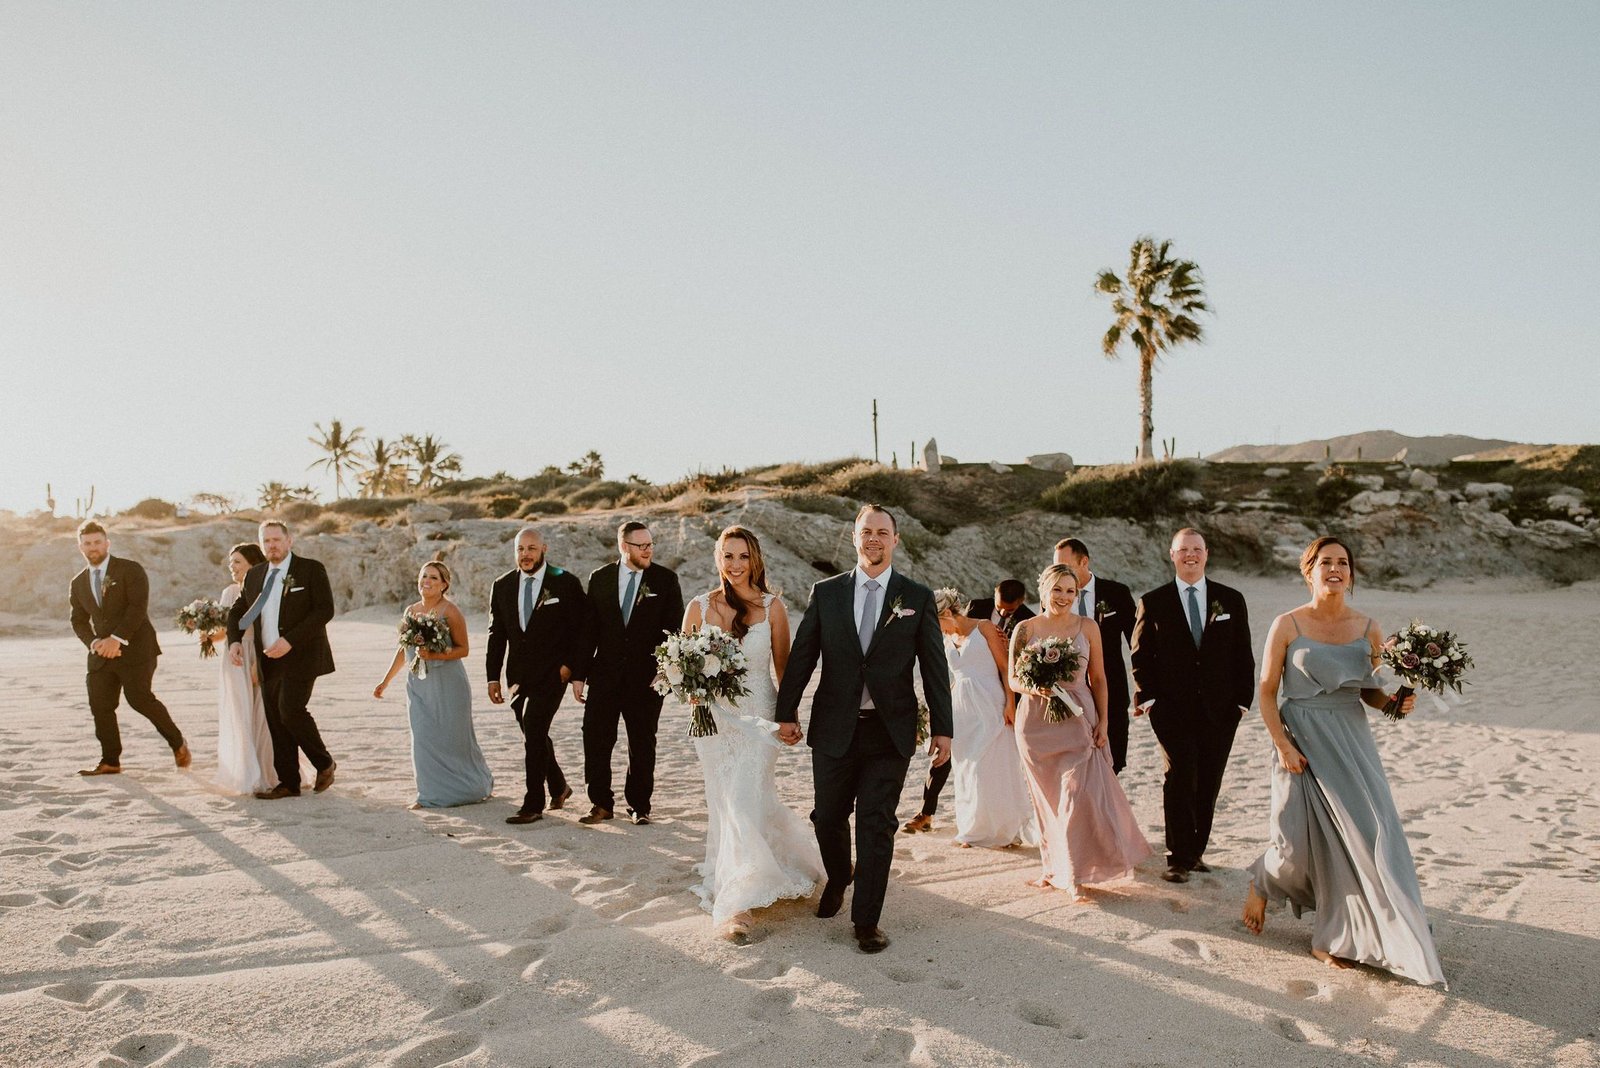 Full Bridal Party at Destination Wedding in Los Cabos Mexico. Wedding Planning by Cabo Wedding Services. Wedding Photography by Ana and Jerome in Los Cabos, Mexico